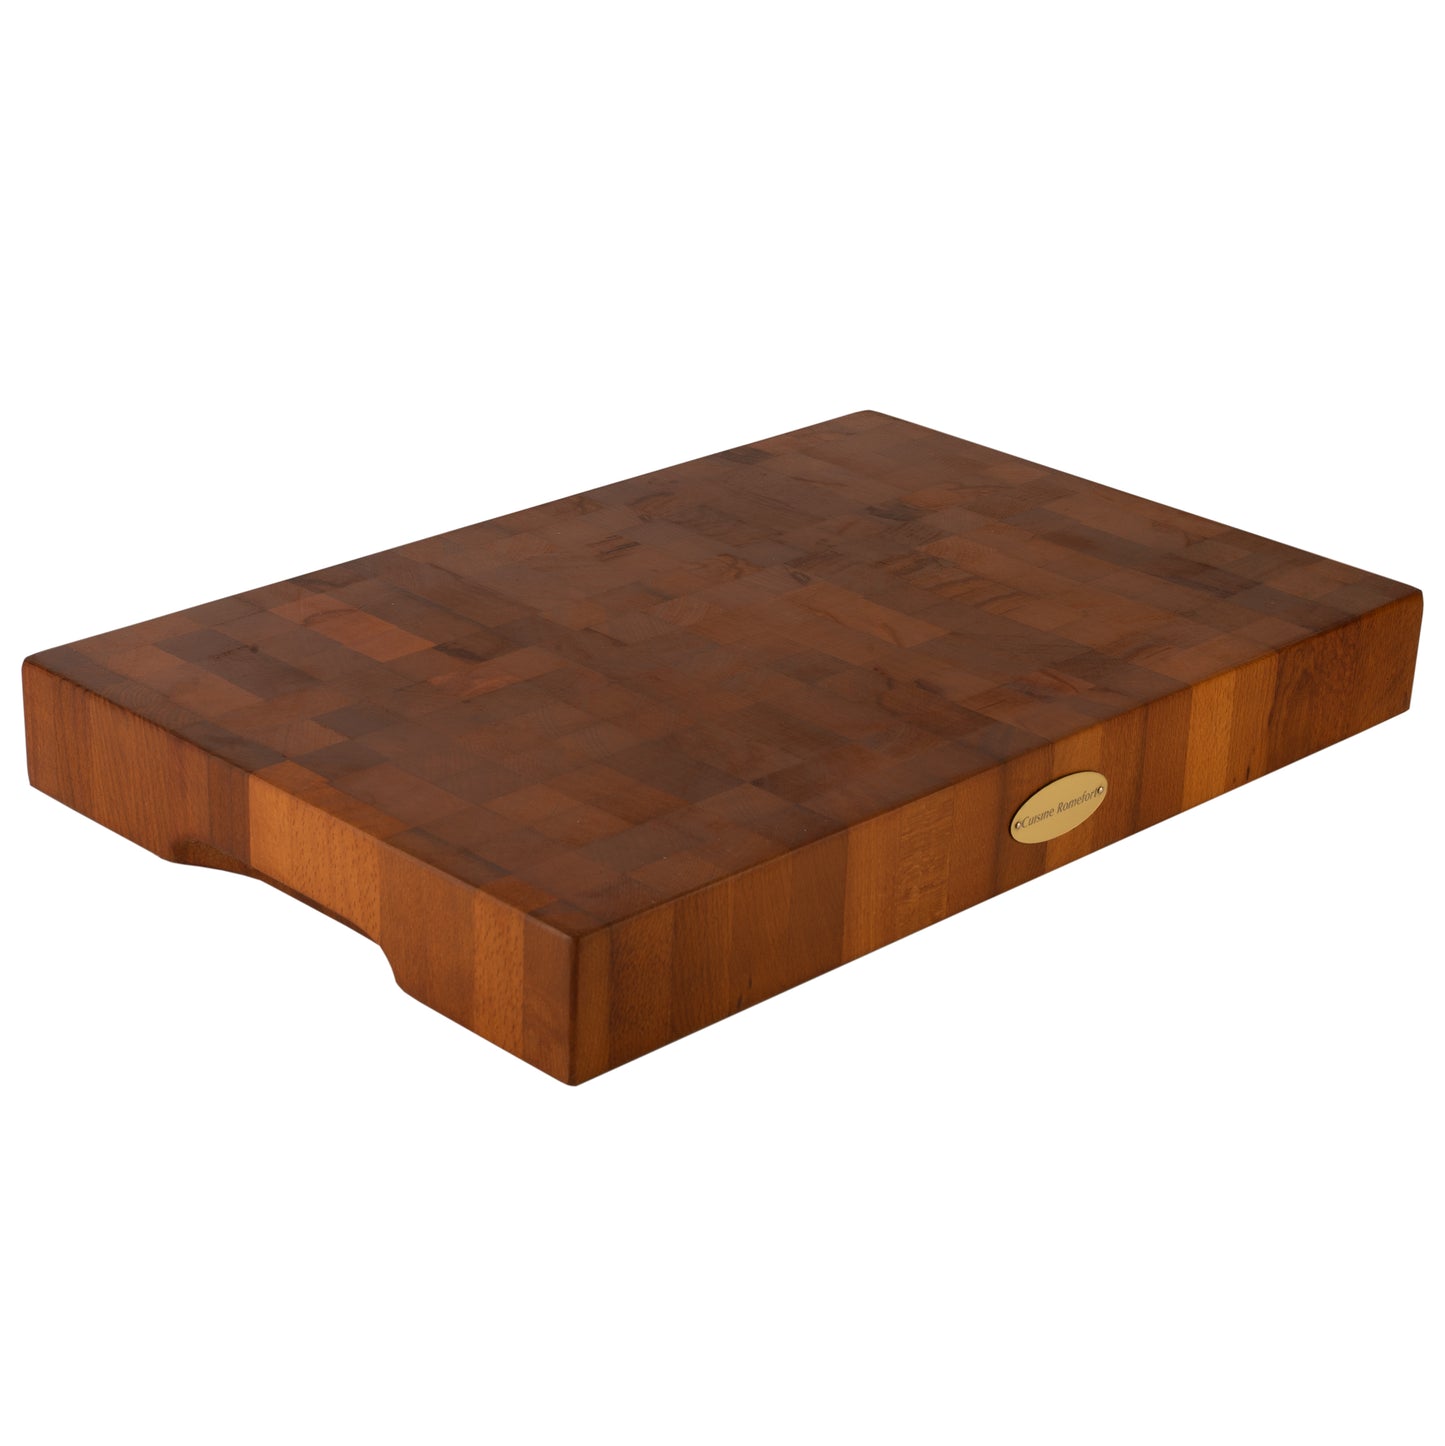 Butcher block with emblem (23.6 x 15.7 x 2.75 inches) made out of thermo treated, end grain beech wood